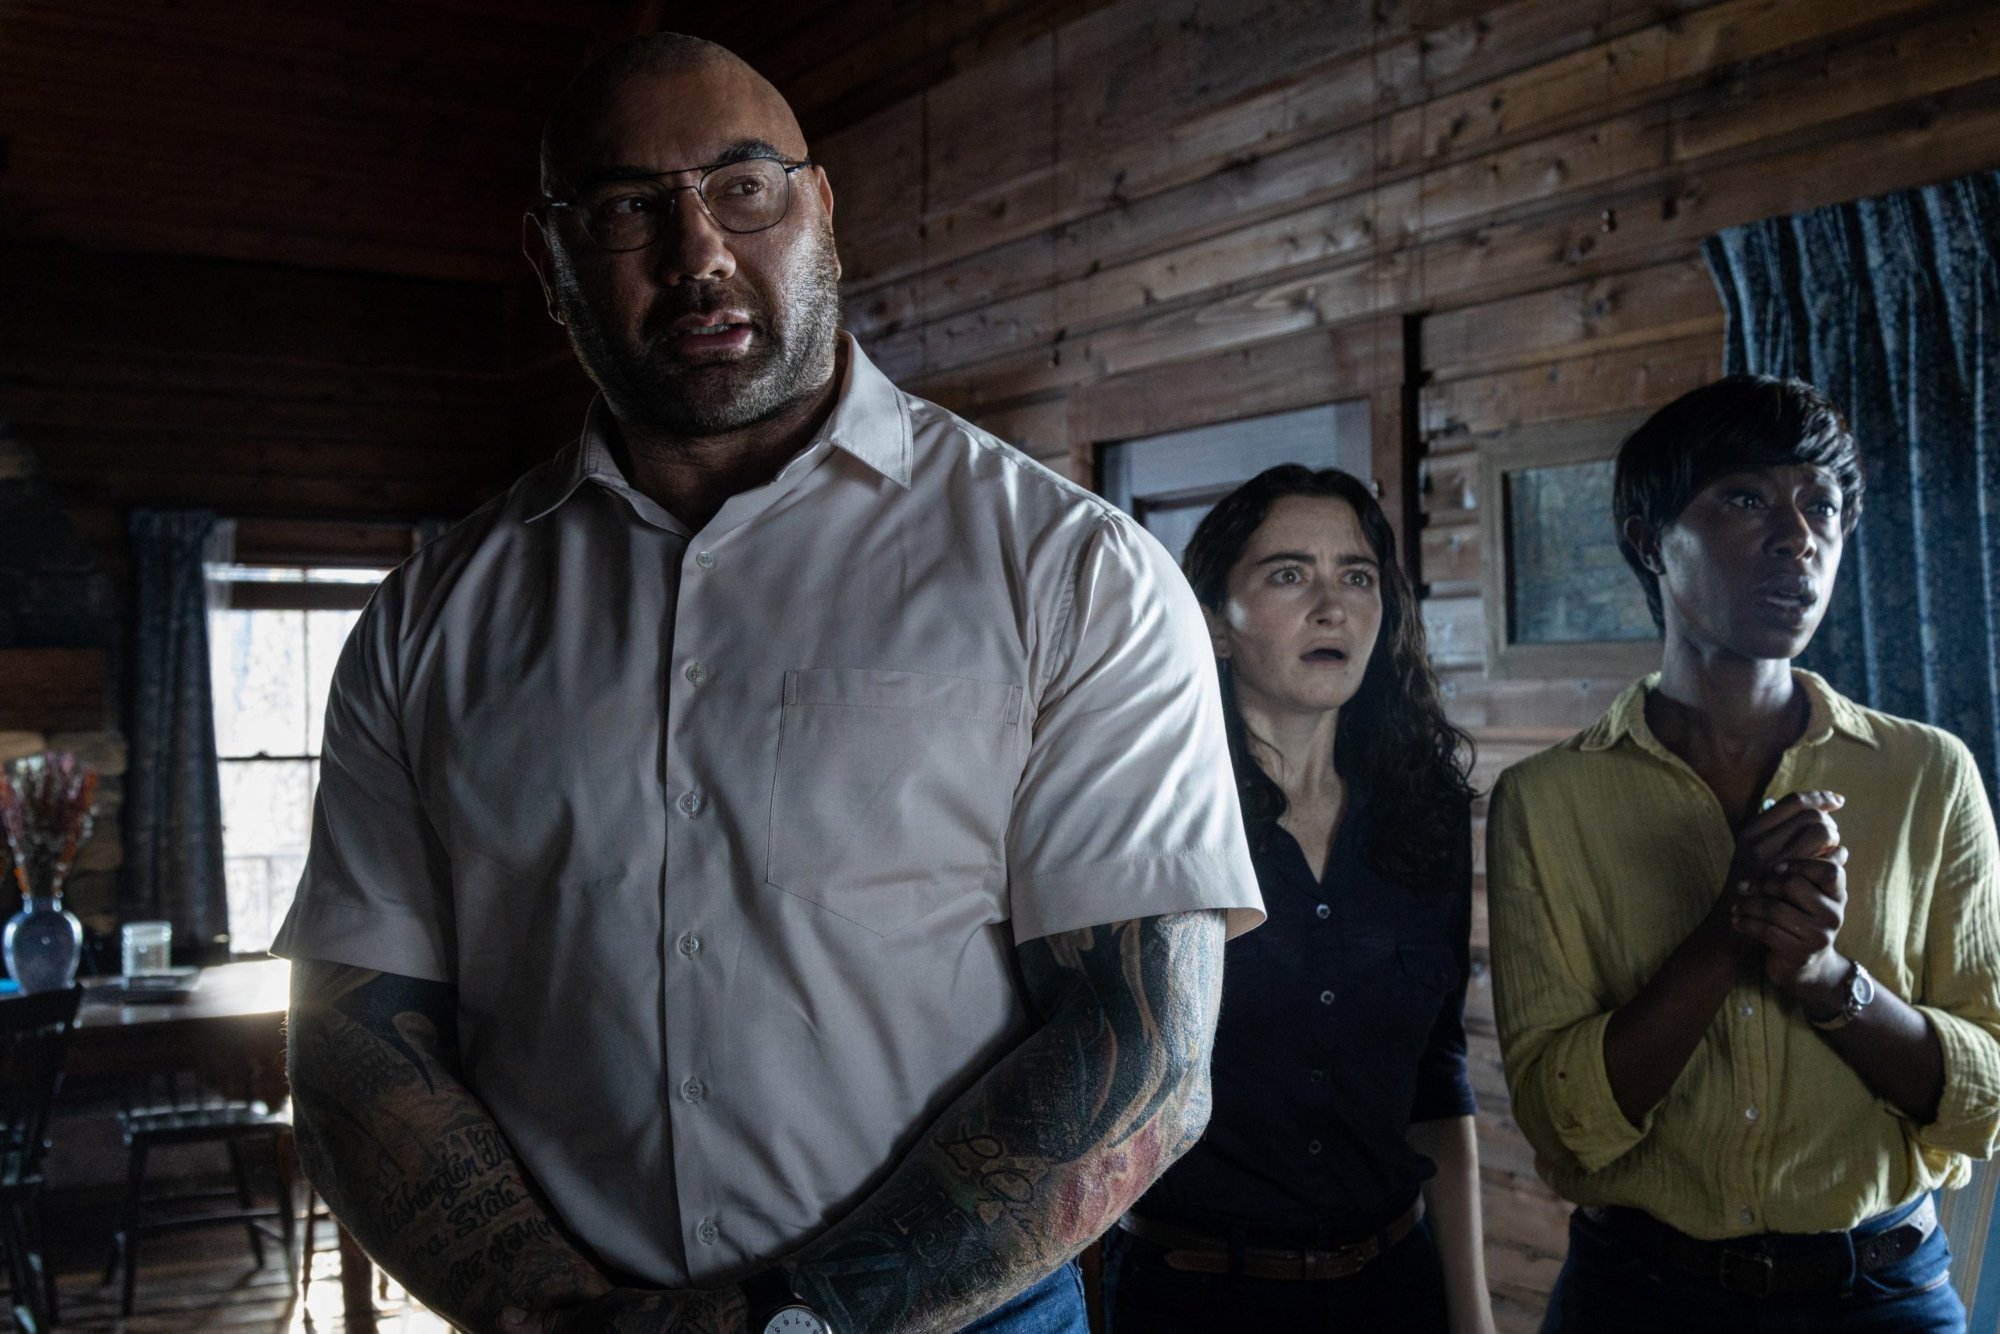 'Knock at the Cabin' Dave Bautista as Leonard, Abby Quinn as Ardiane, and Nikki Amuka-Bird as Sabrina standing in wood cabin looking shocked